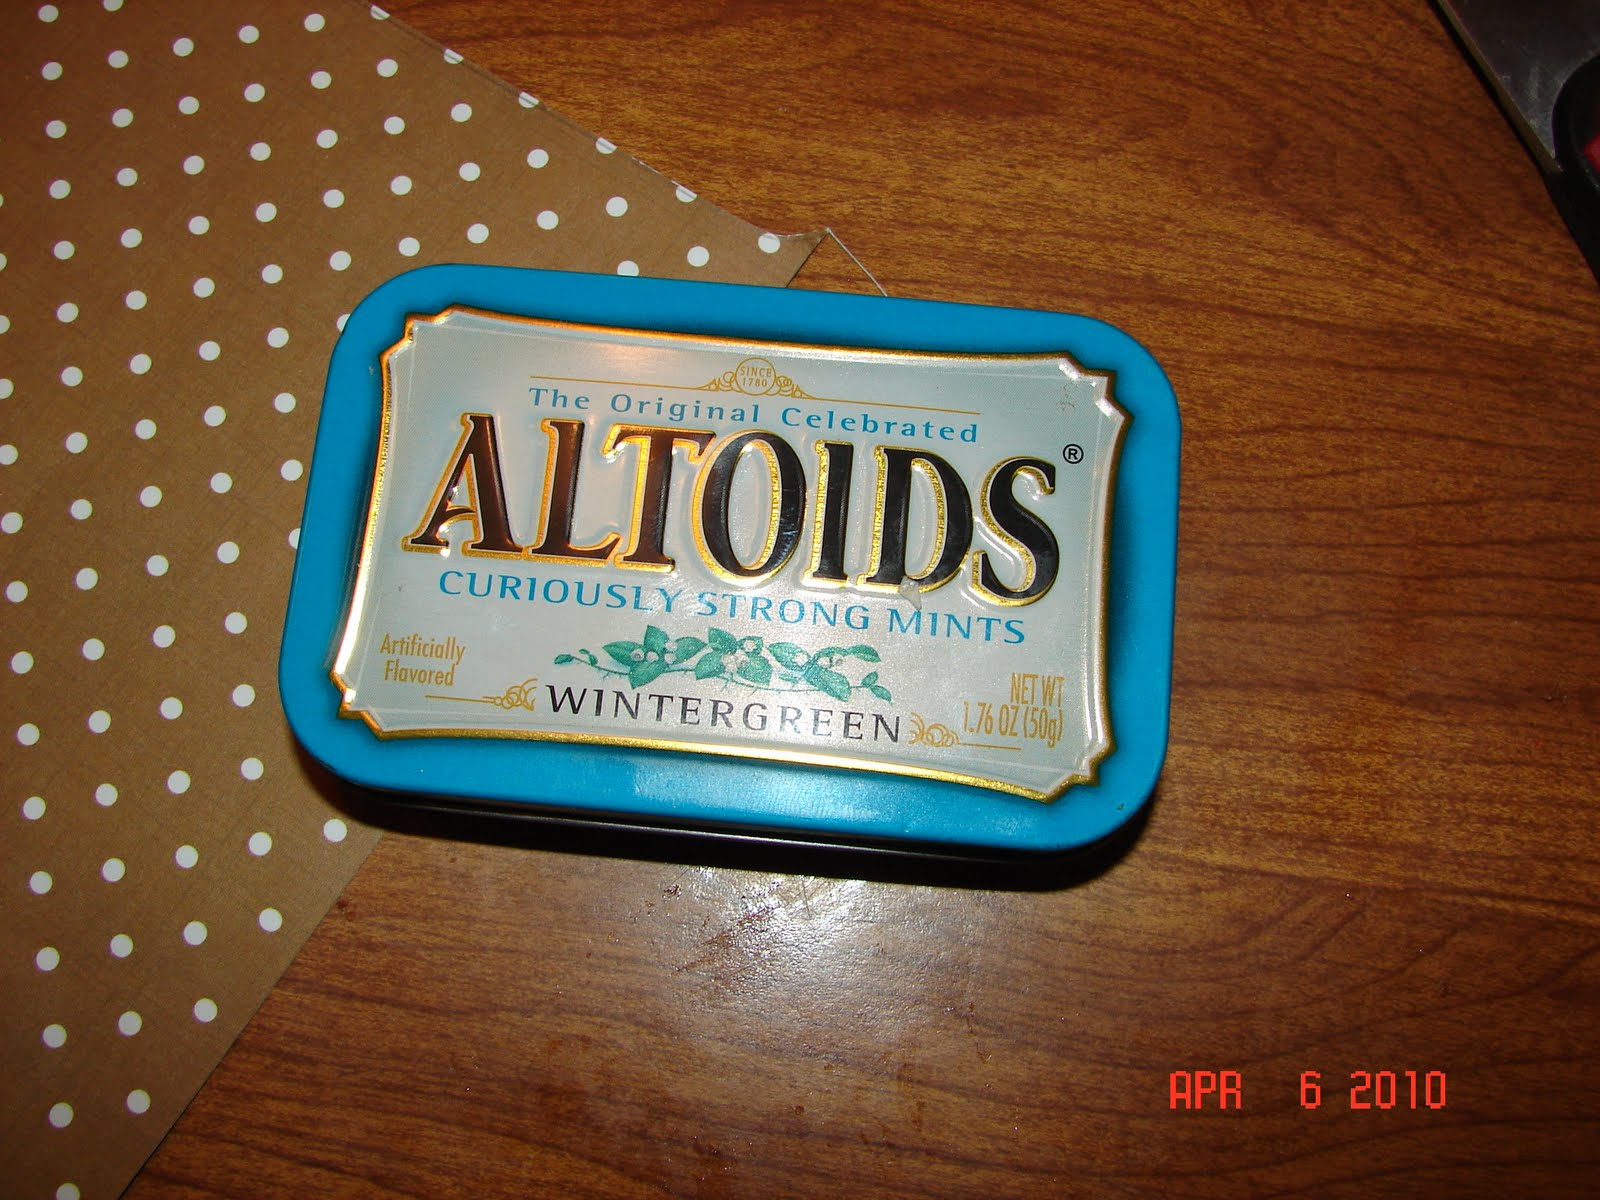 20 Altoids Tin Uses You Have Probably Never Thought Of